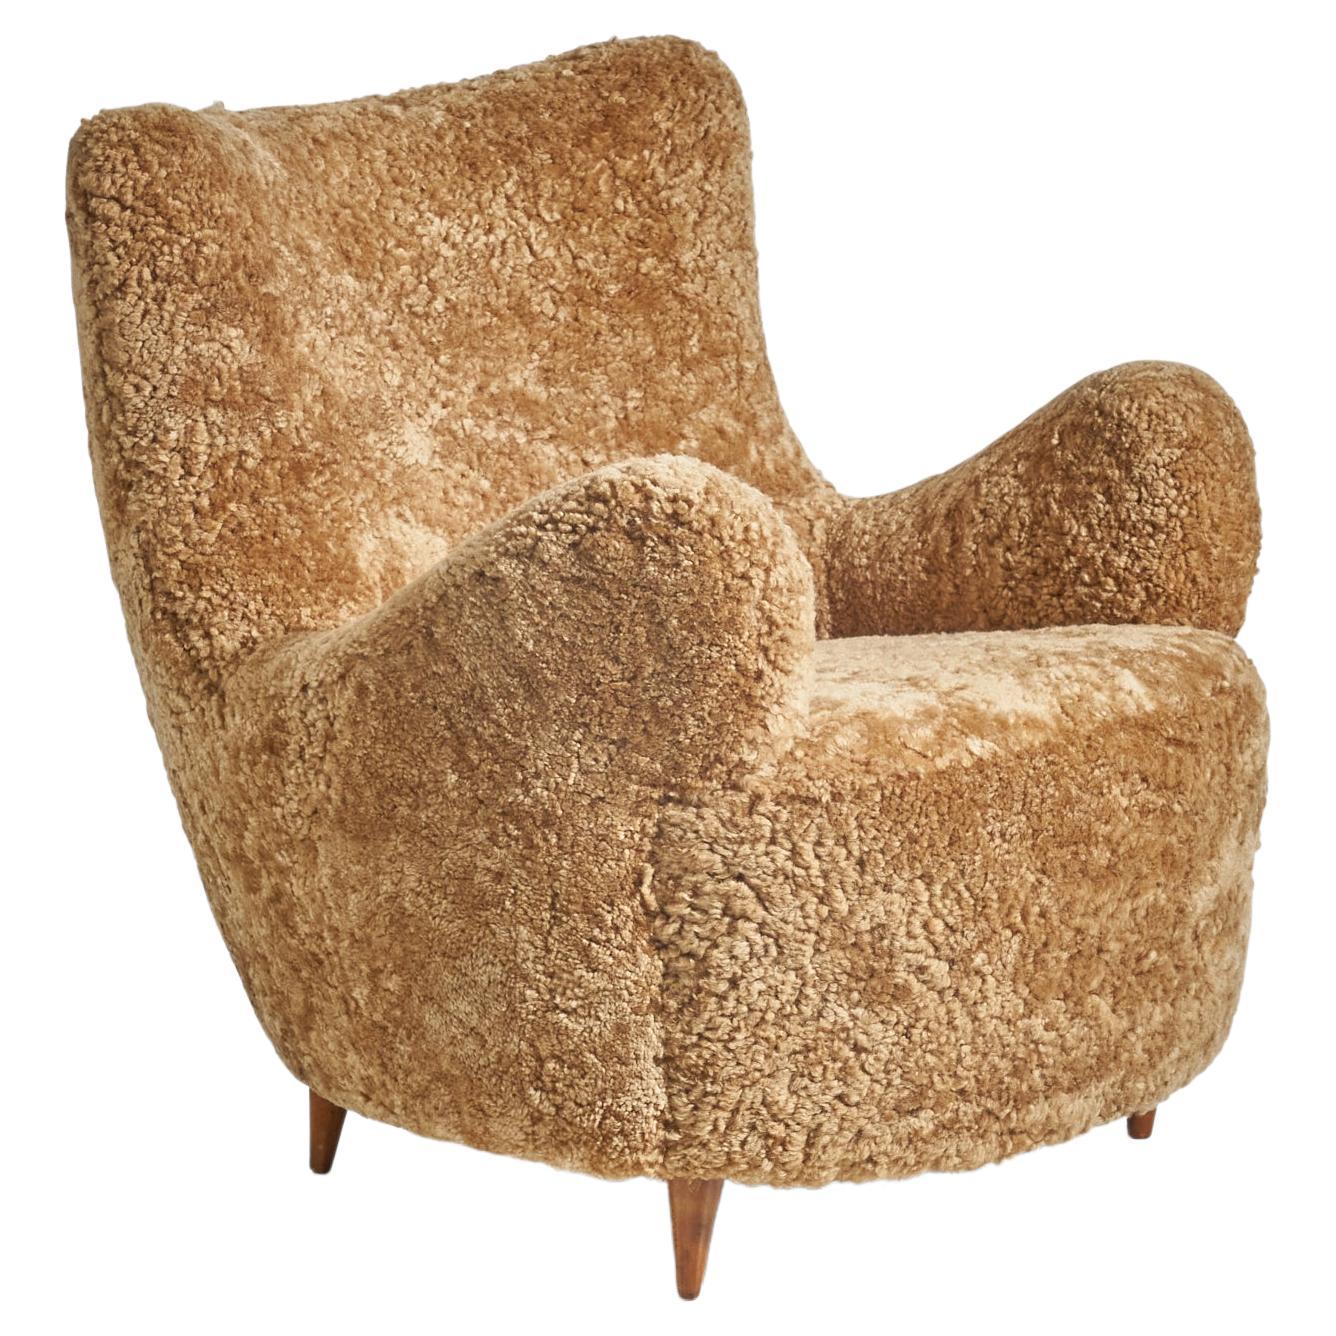 Rito Valla Attribution, Organic Lounge Chair, Beige Shearling, Wood, Italy 1950s